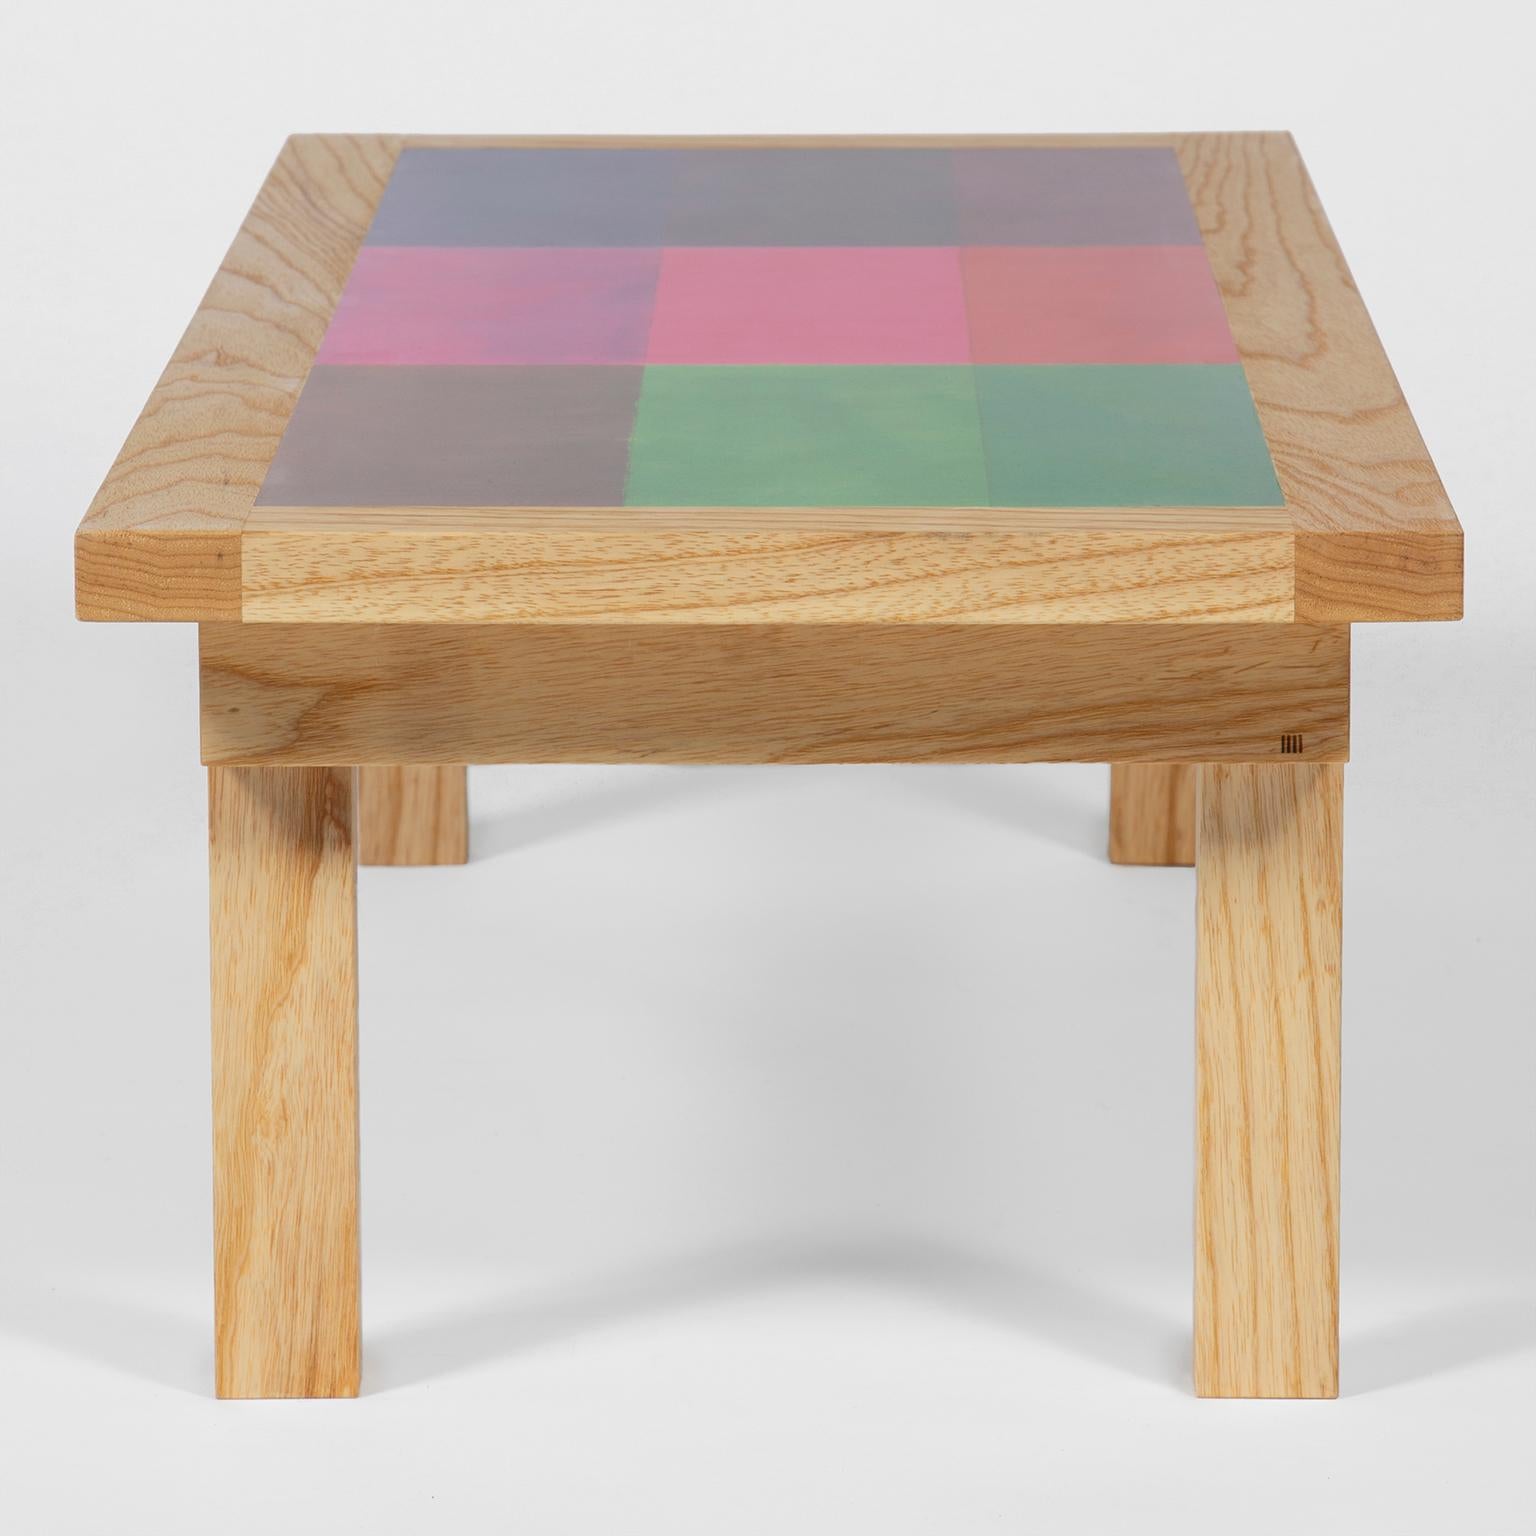 Small size low rectangular table featuring printed laminate facsimile taken from the original artwork by Robyn Denny as part of the DANAD Design collective (1958-1962).
The laminate surface art is set in a light Ash frame, handcrafted in the UK,